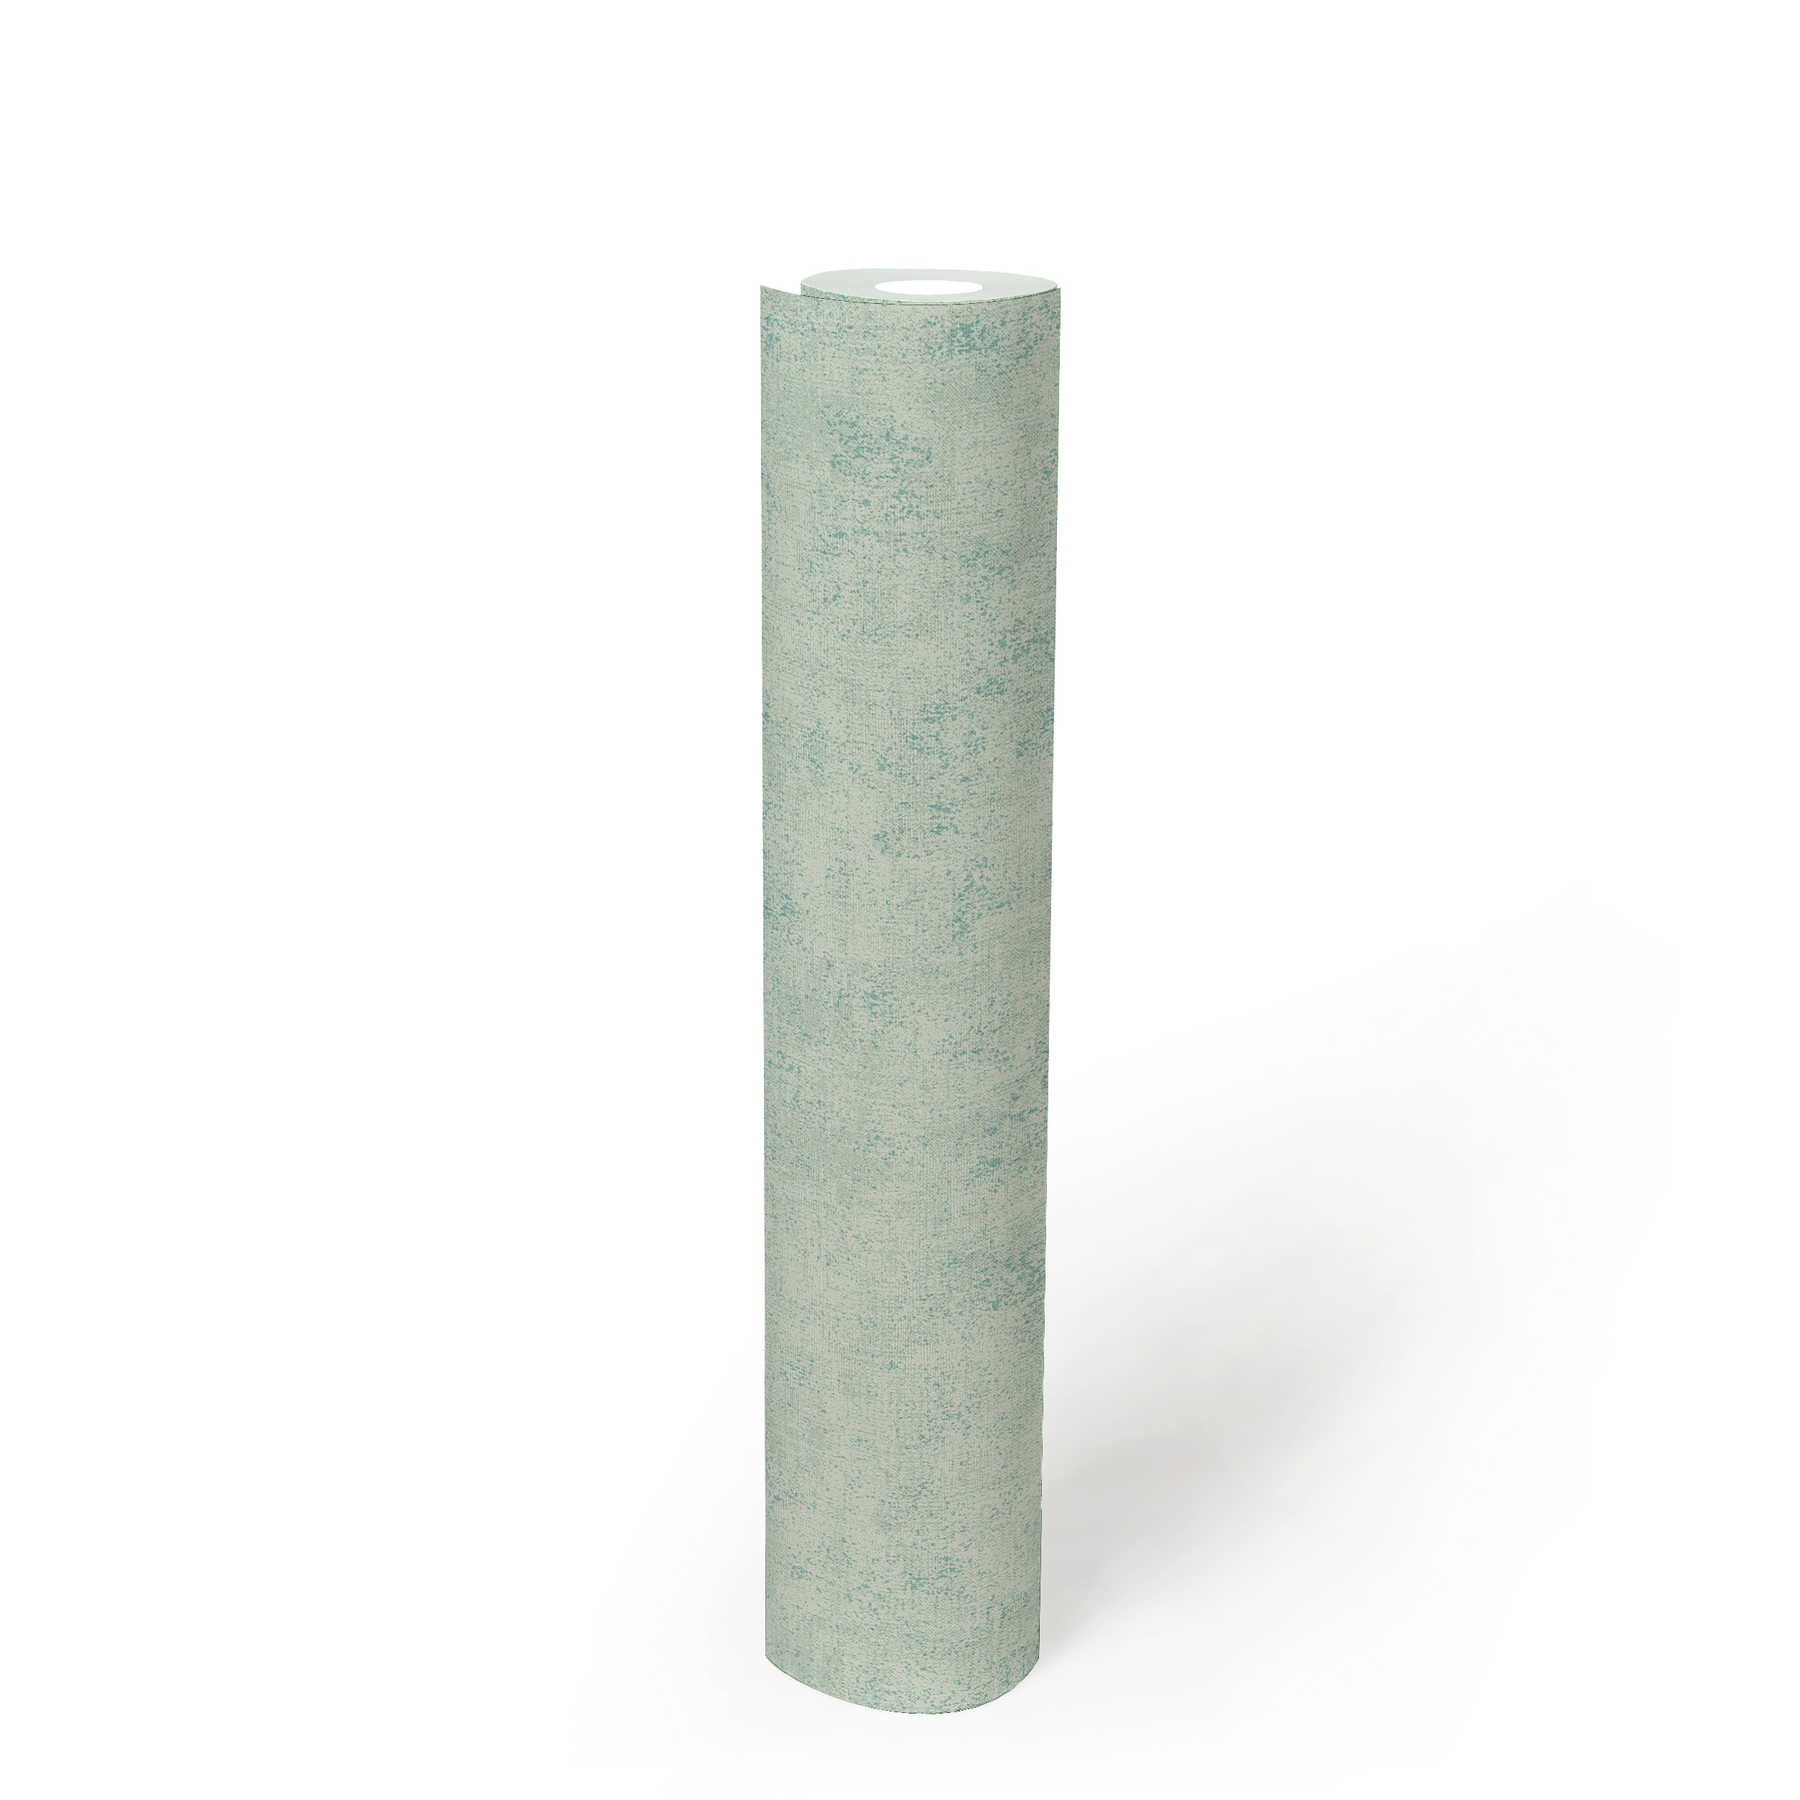             Plain wallpaper with discreet structure look - green
        